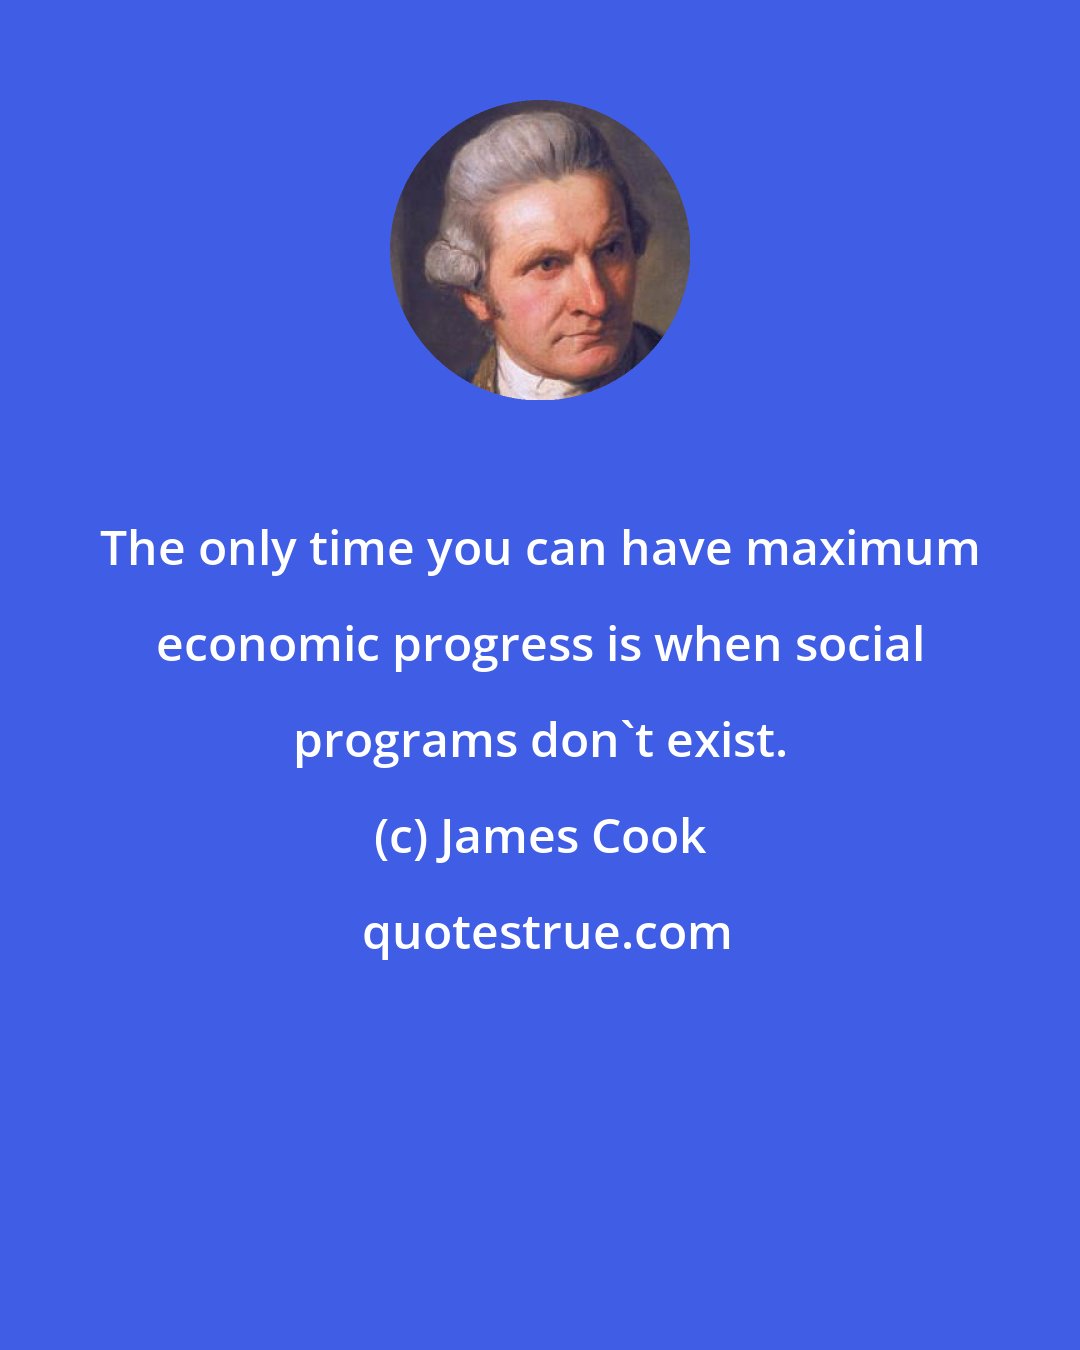 James Cook: The only time you can have maximum economic progress is when social programs don't exist.